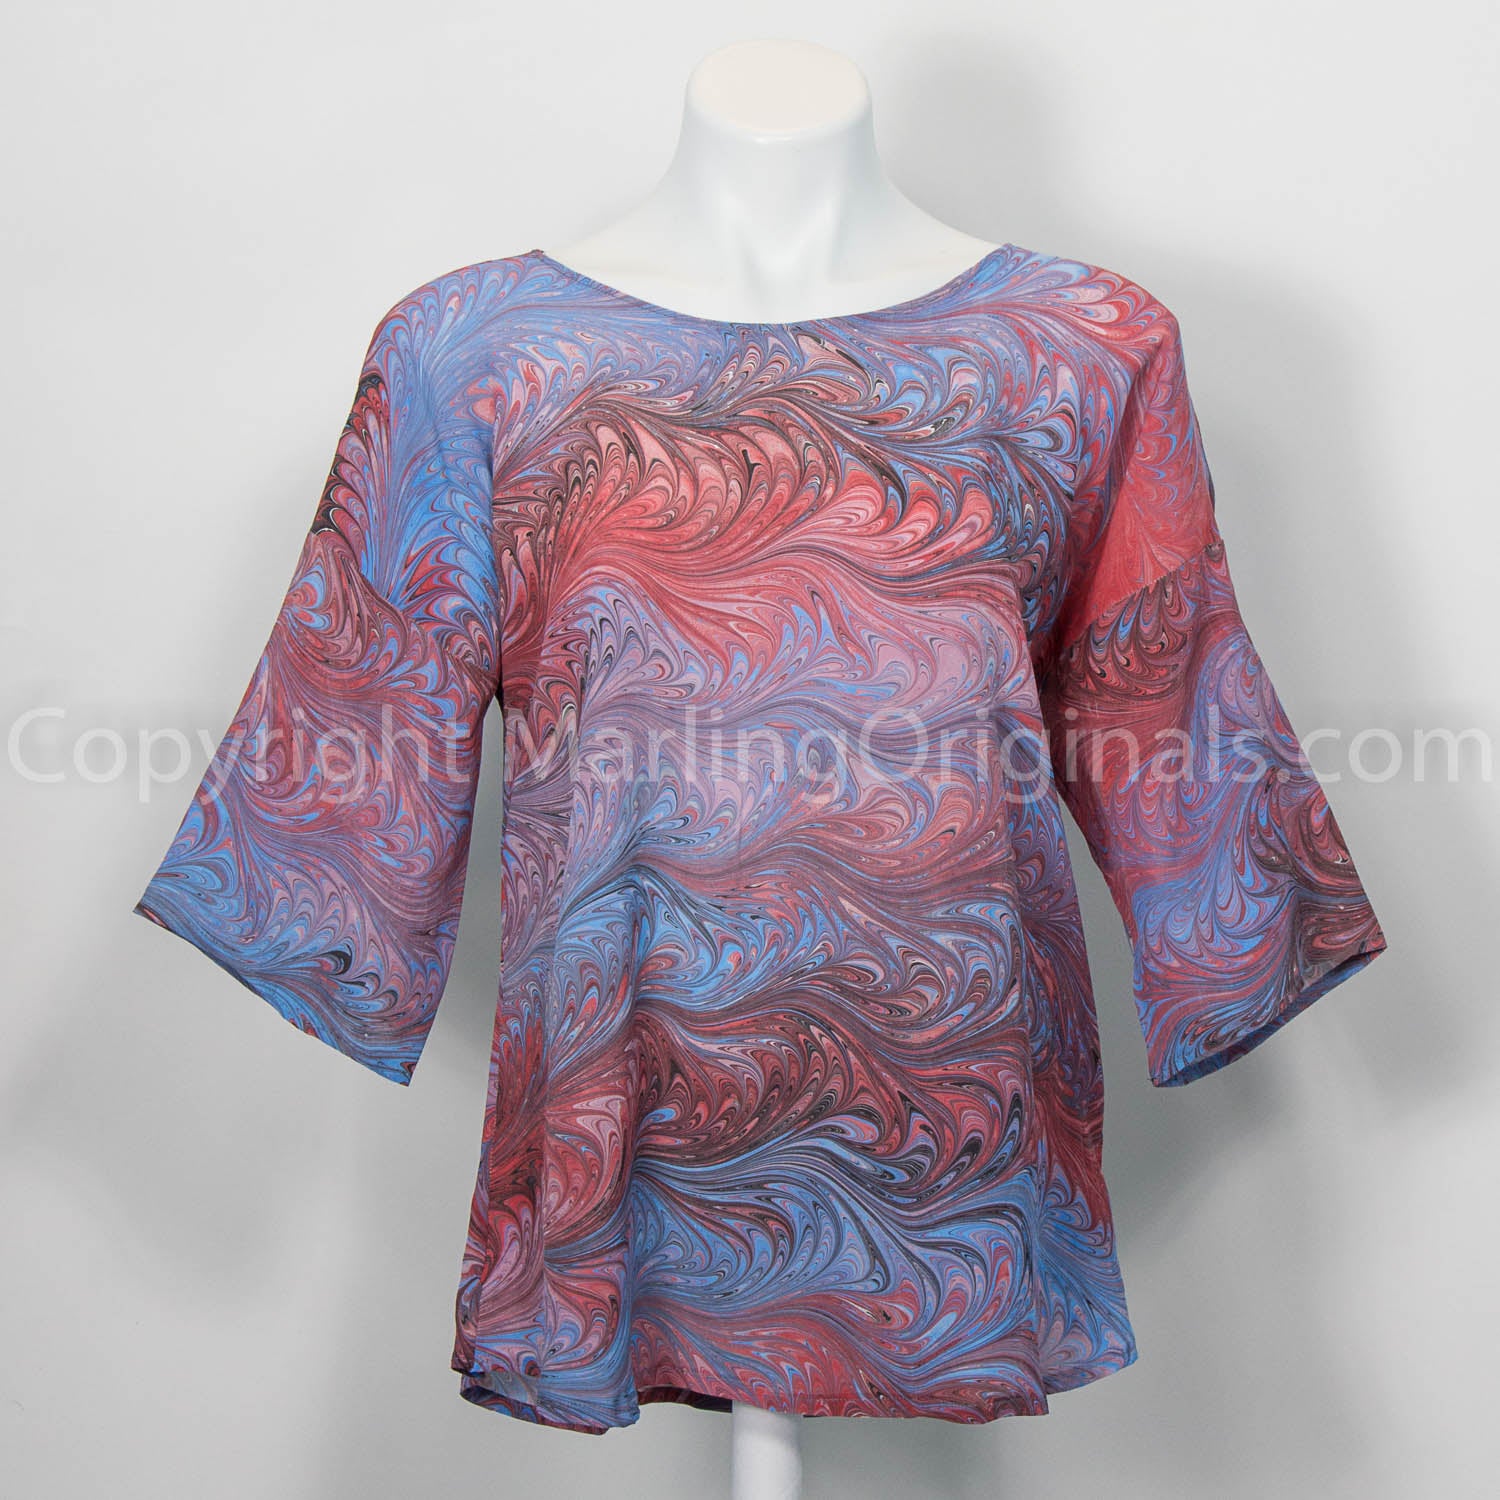 marbled silk top in blues with red, pink and cranberry tones.  Round neck, curved hem, half sleeves.